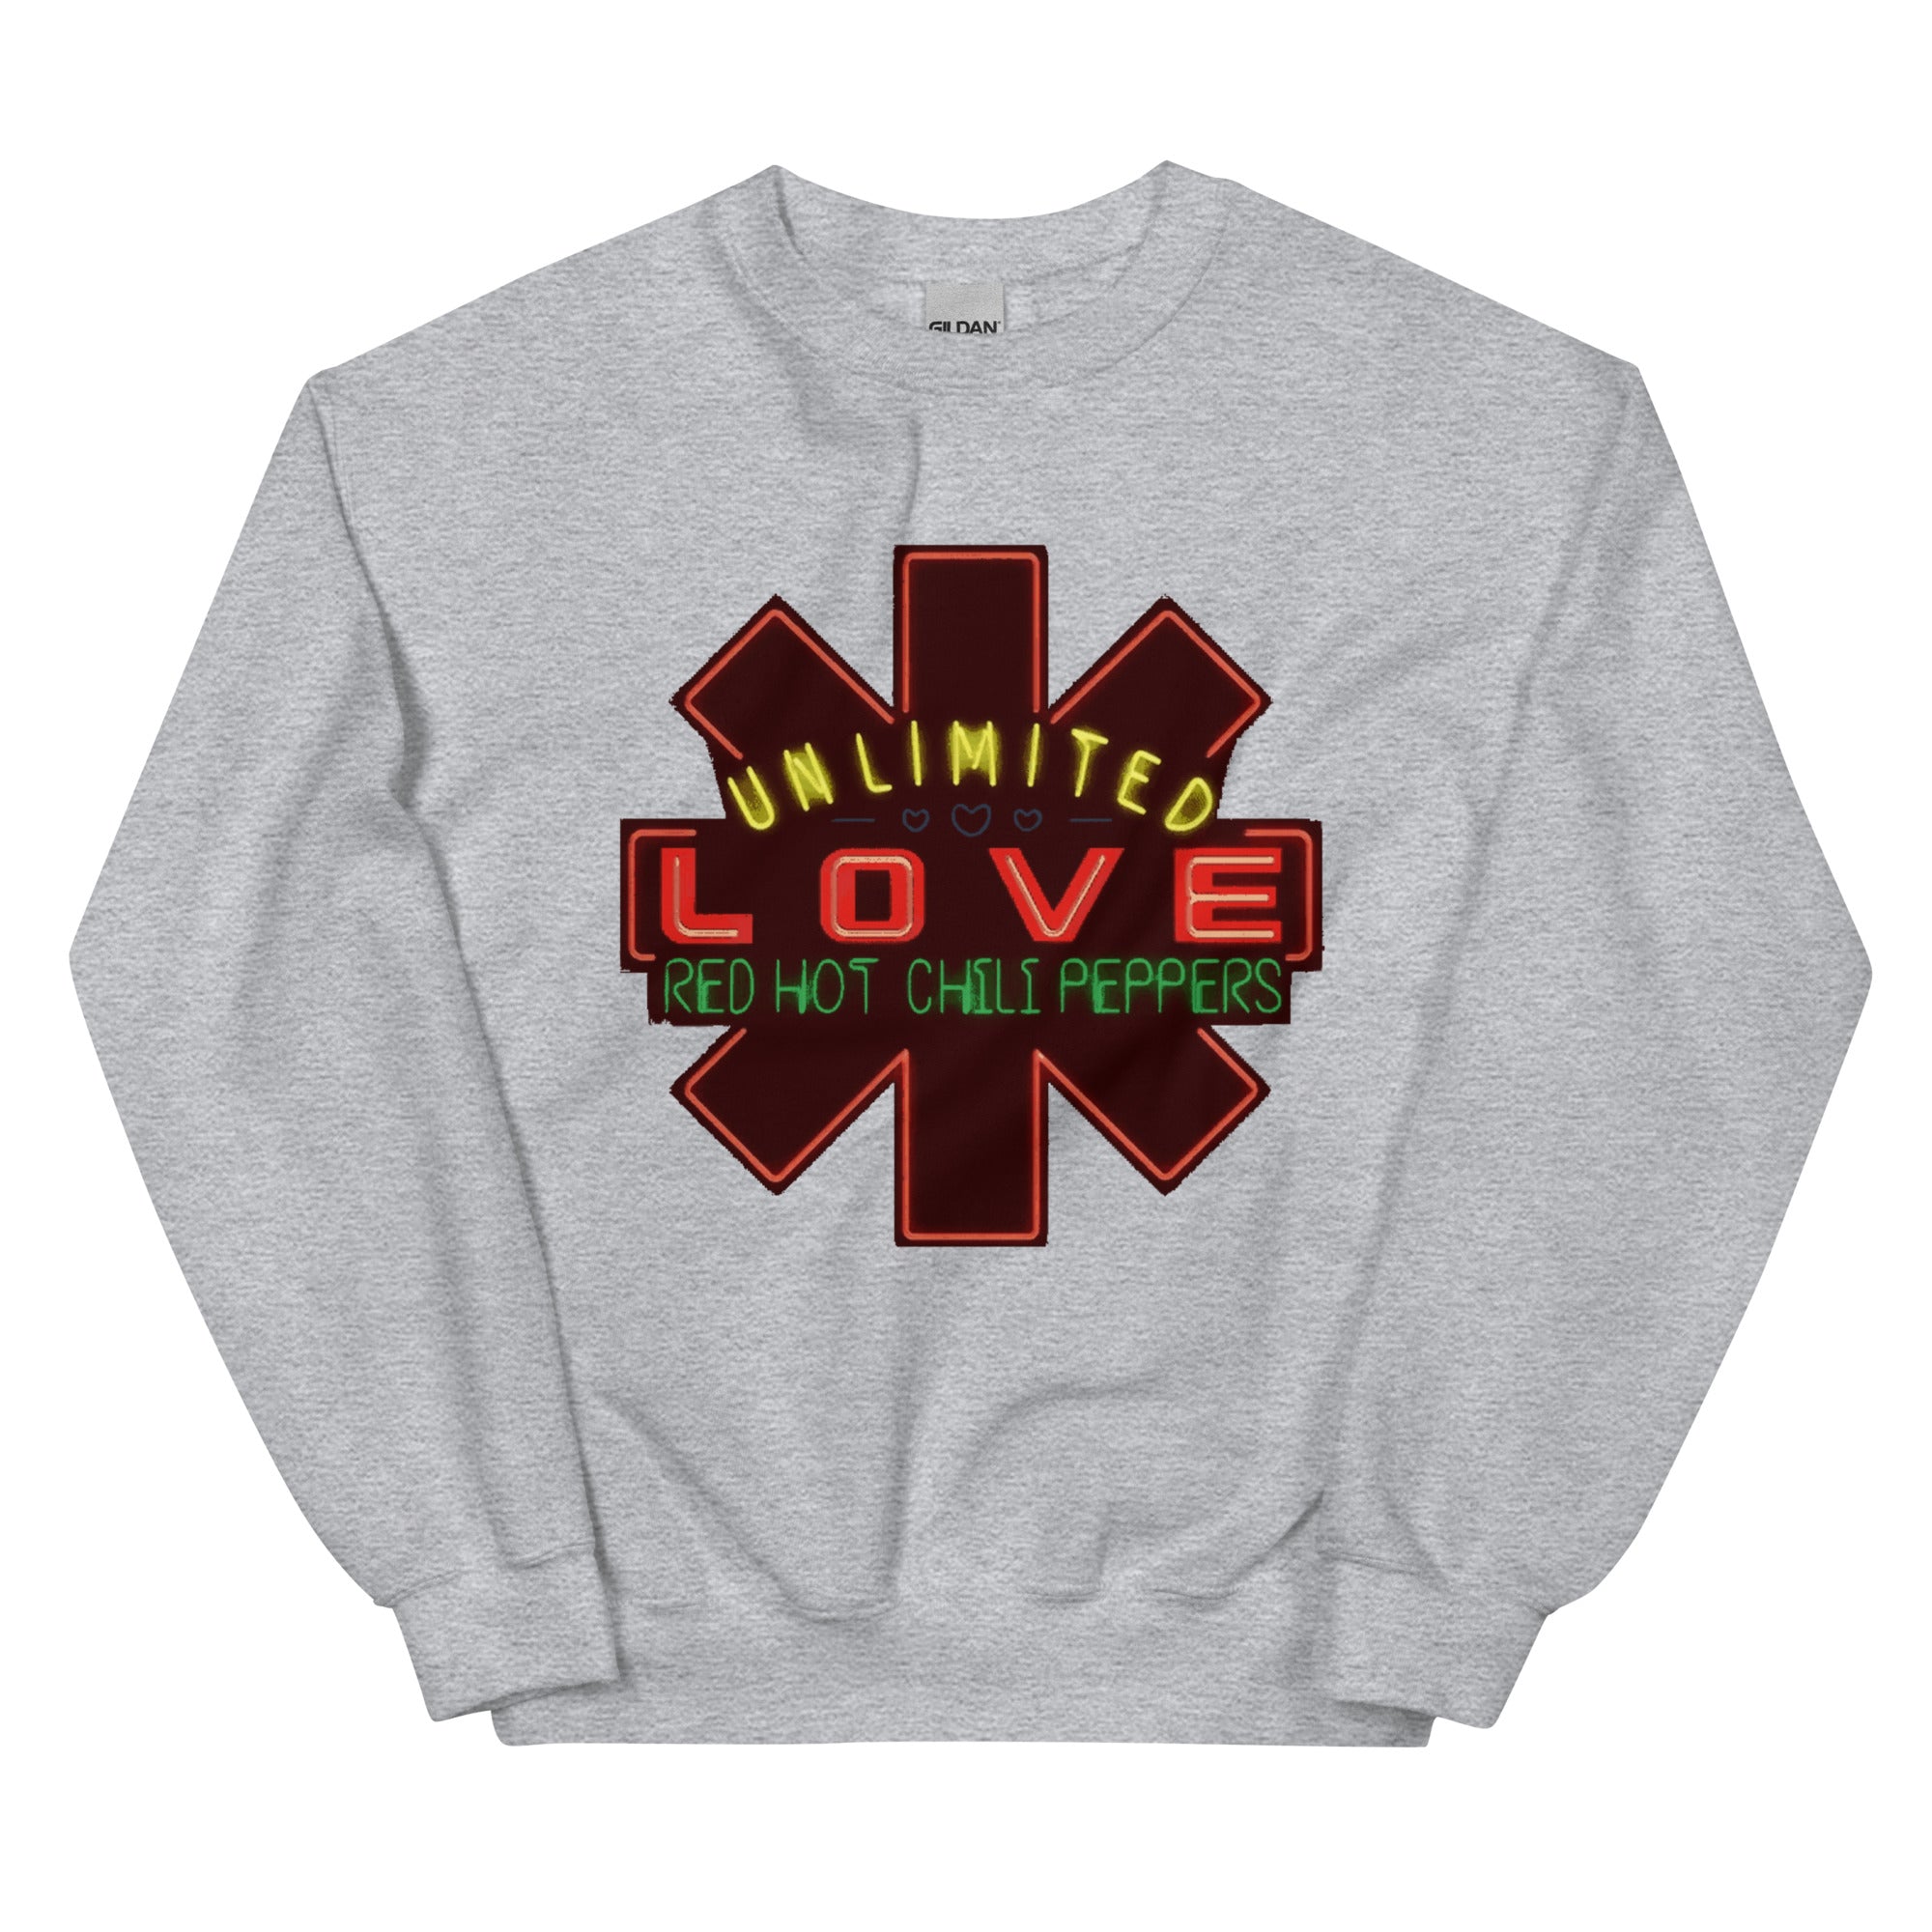 Red Hot Chili Peppers x Unlimited Love Unisex Sweatshirt